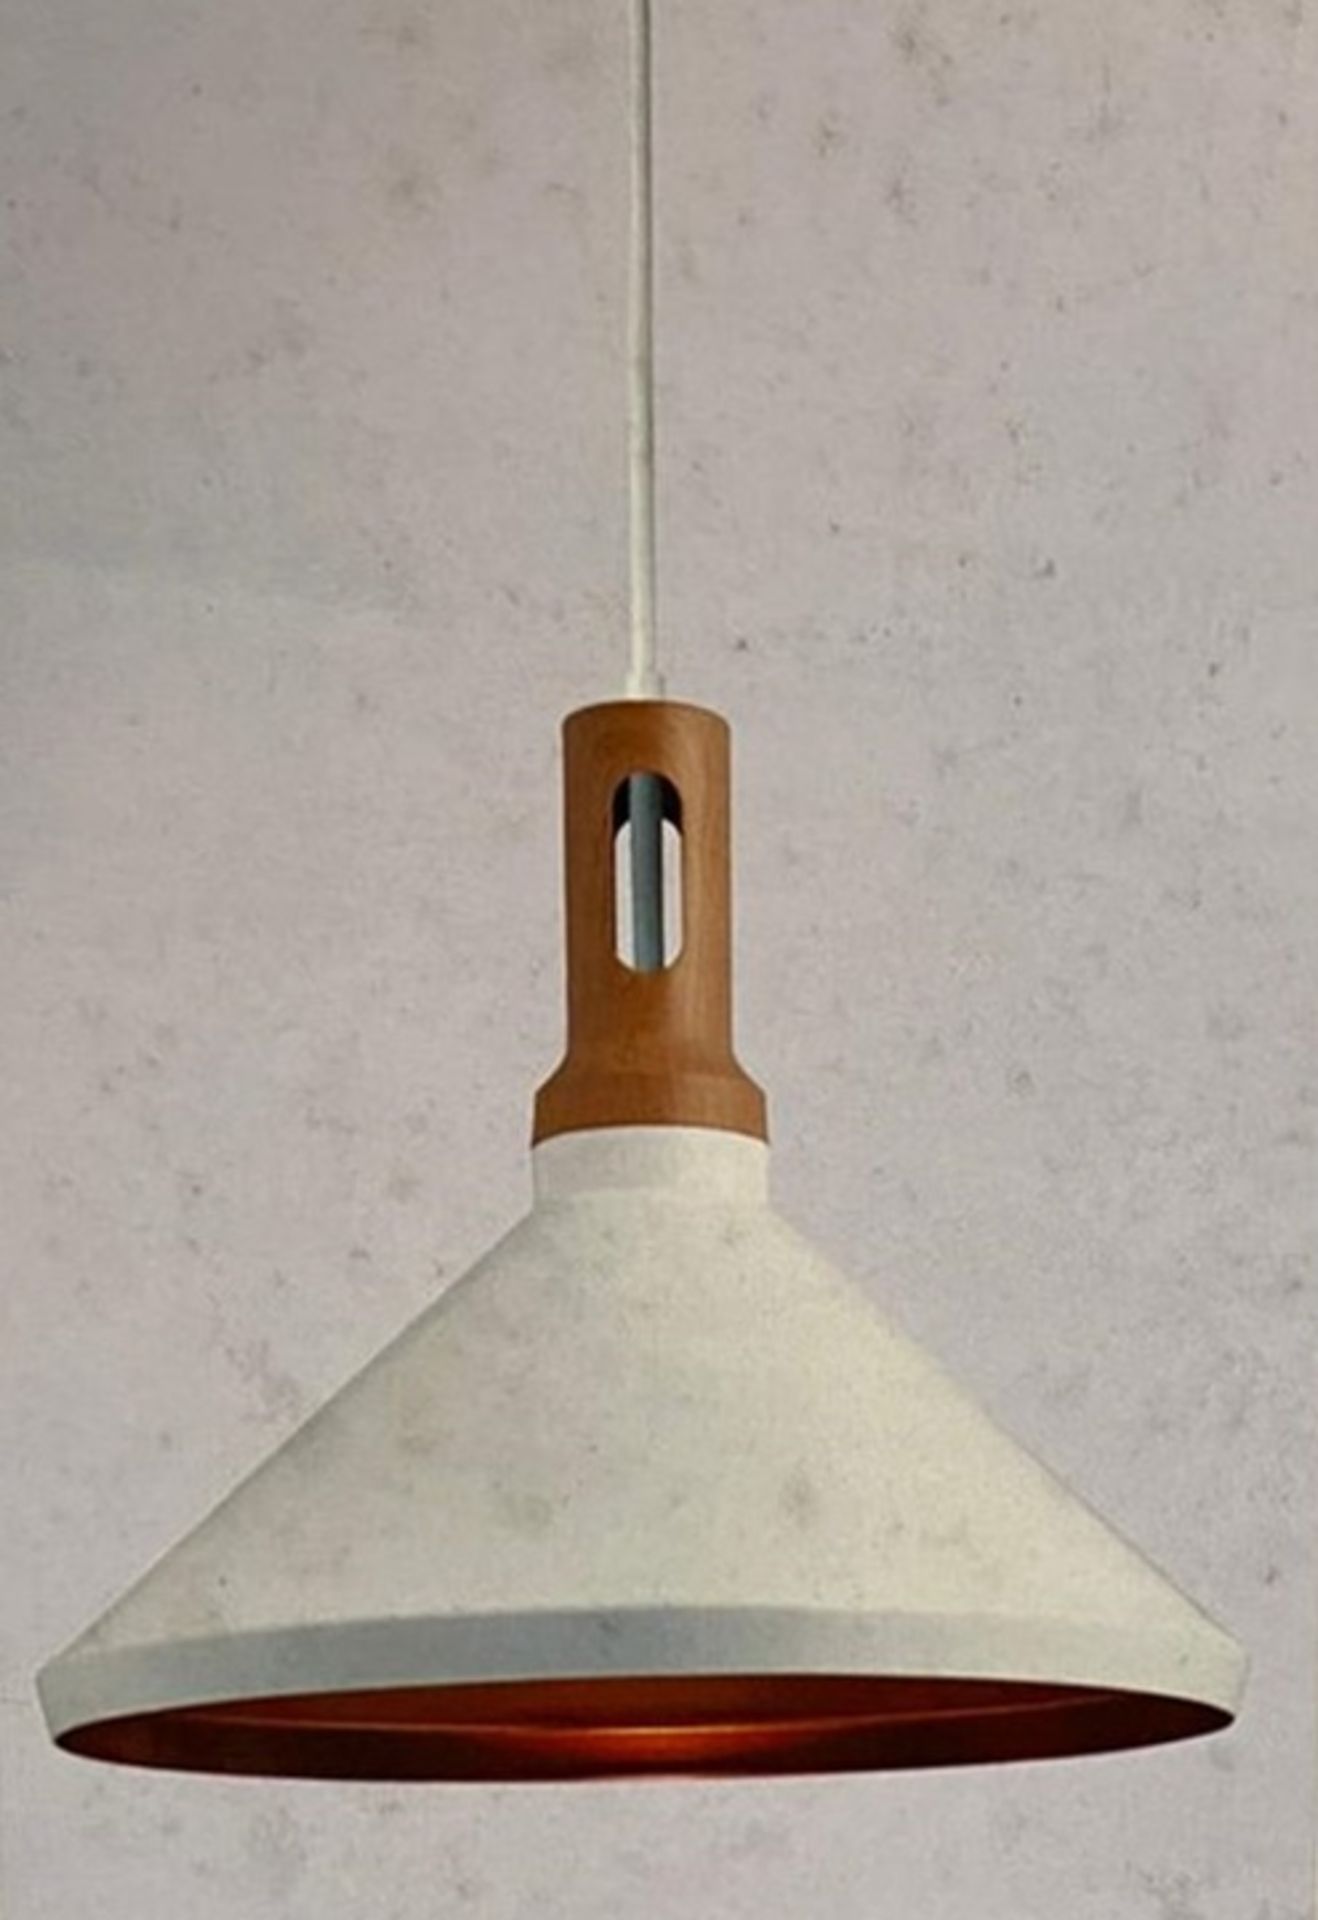 1 x Searchlight 1 Light Cone Pendant in white - Ref: 7051WH - New and Boxed - RRP: £85.00